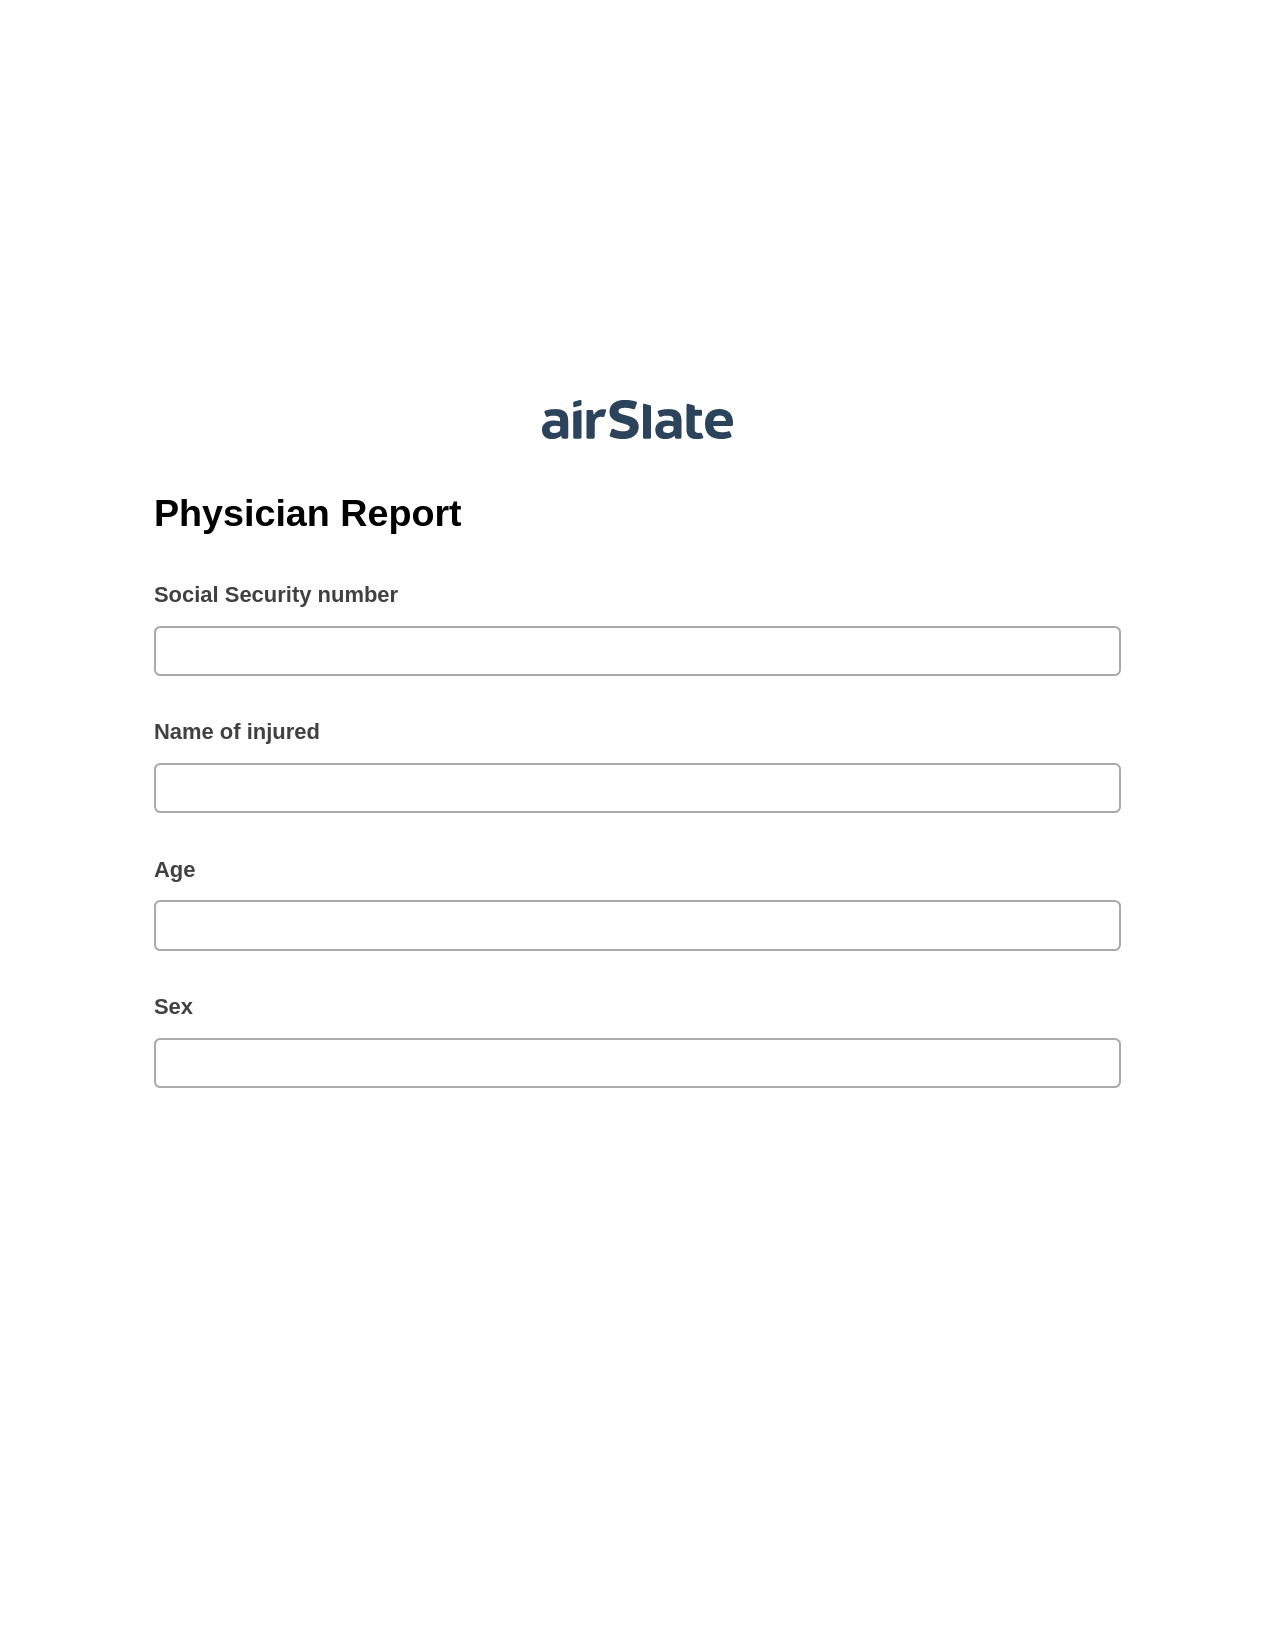 Physician Report Pre-fill from Excel Spreadsheet Bot, Unassign Role Bot, Archive to Google Drive Bot